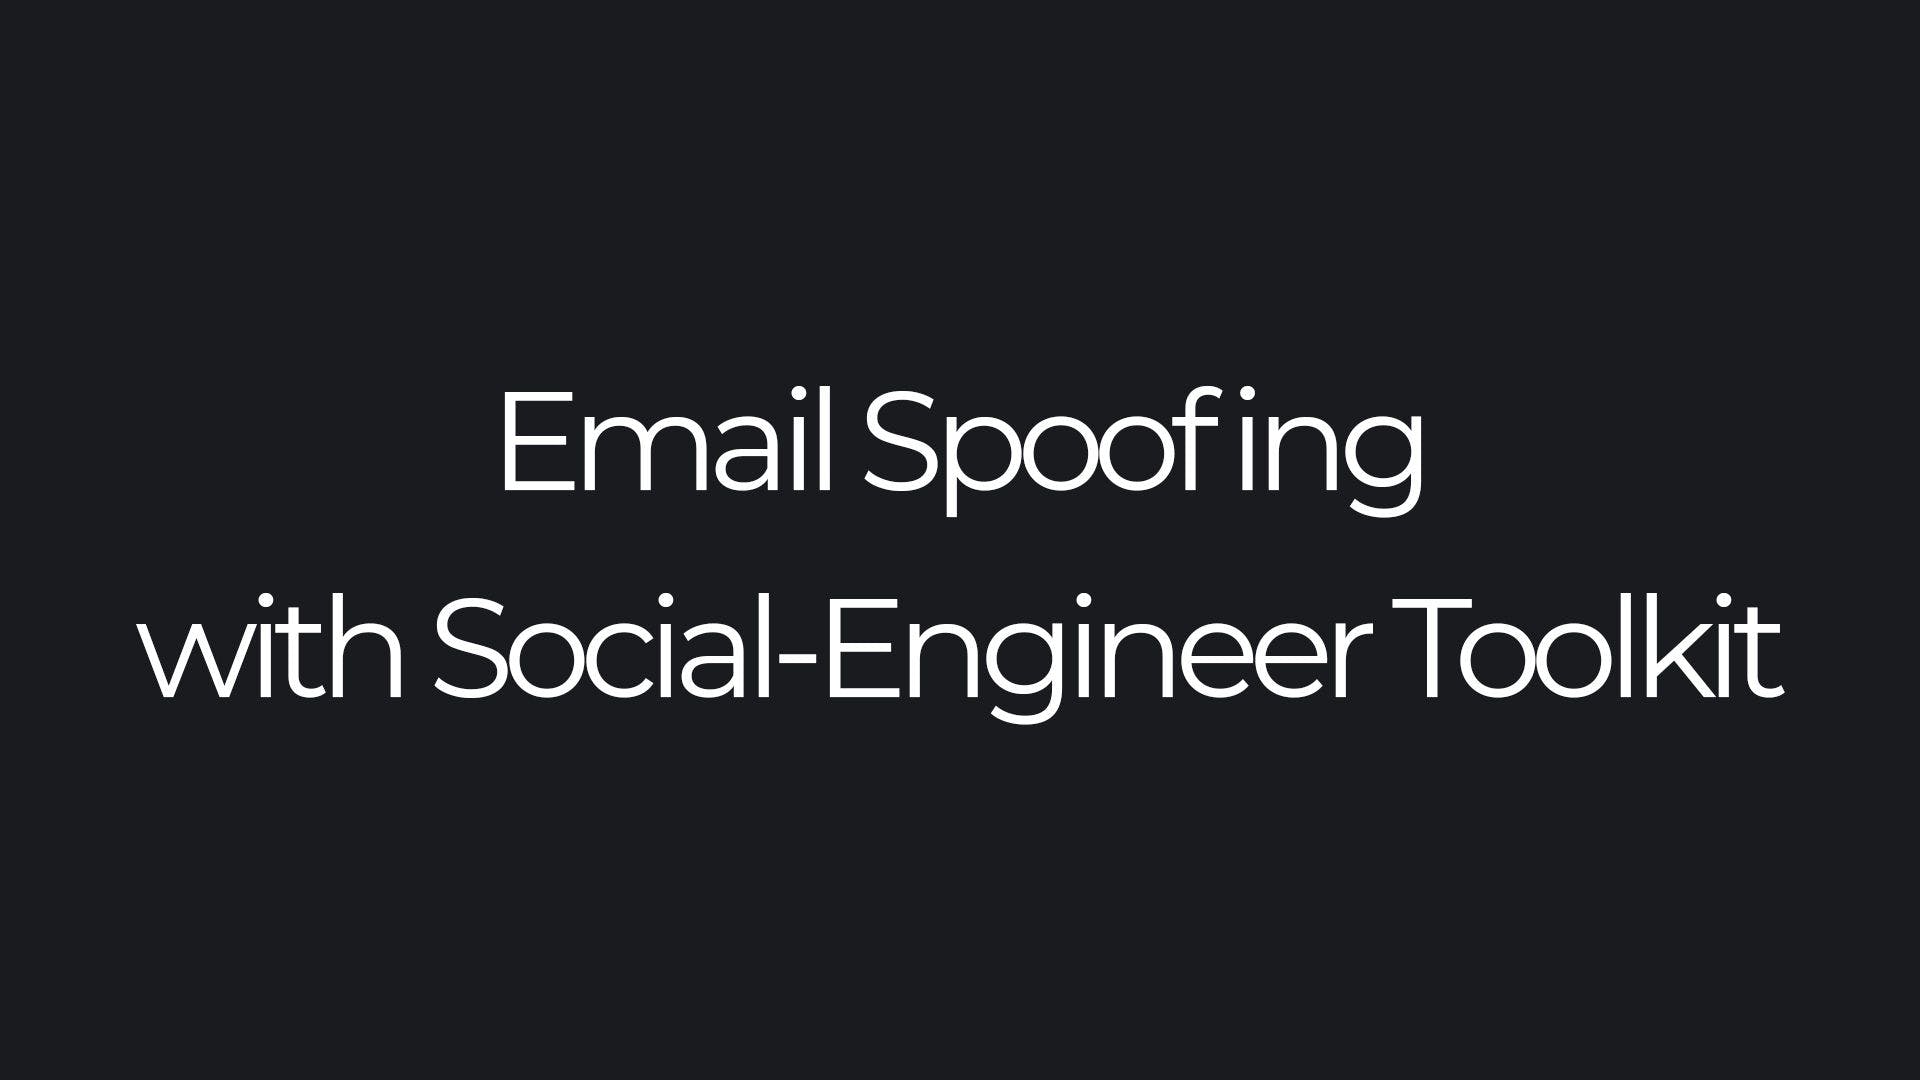 How does email spoofing work?